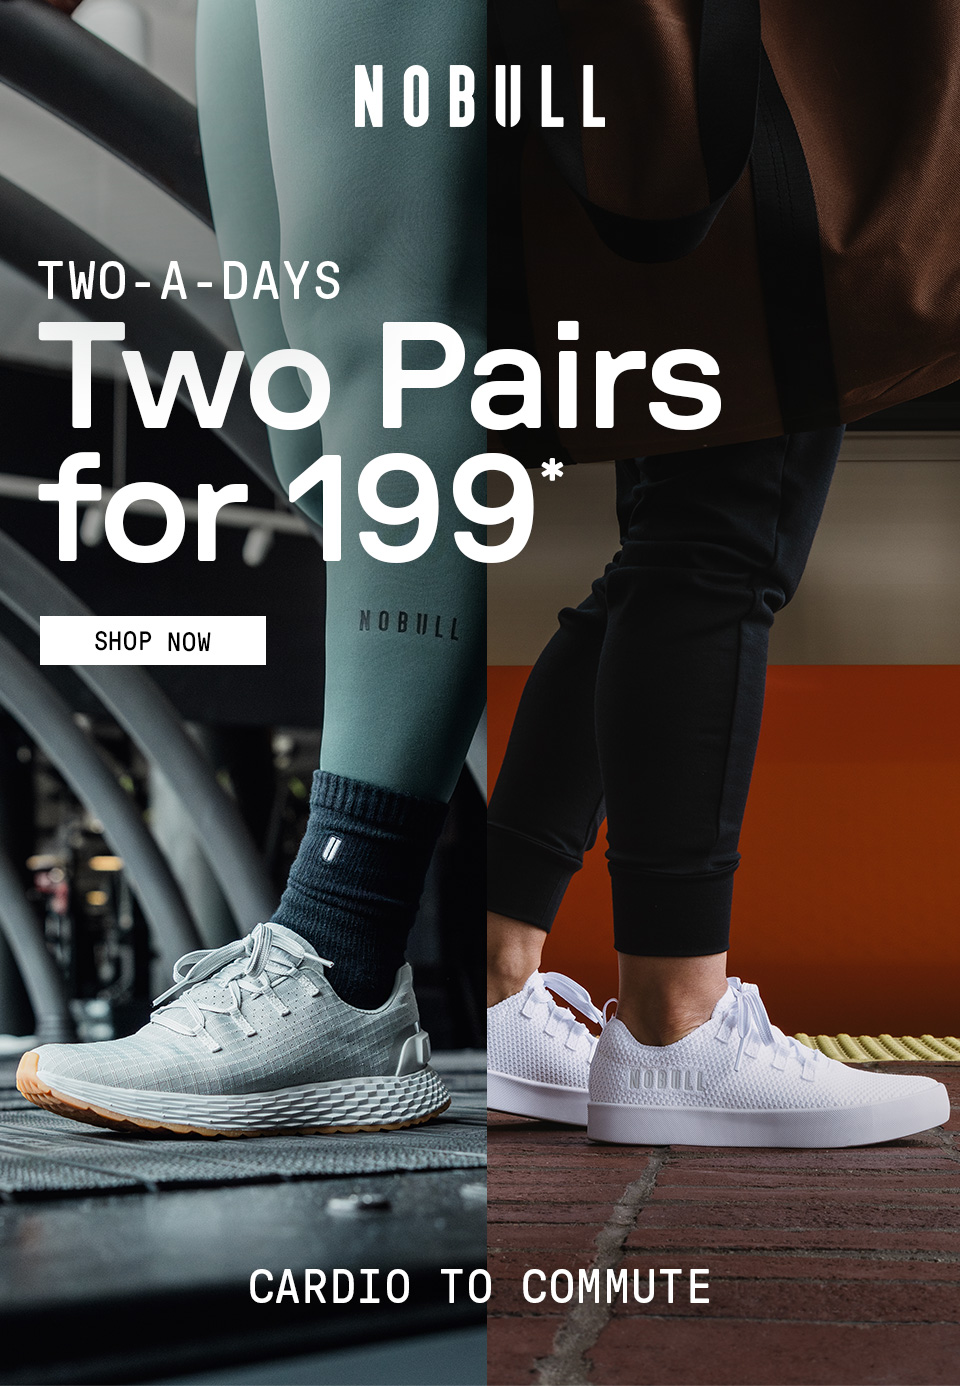 MIX AND MATCH ANY TWO PAIRS FOR $199